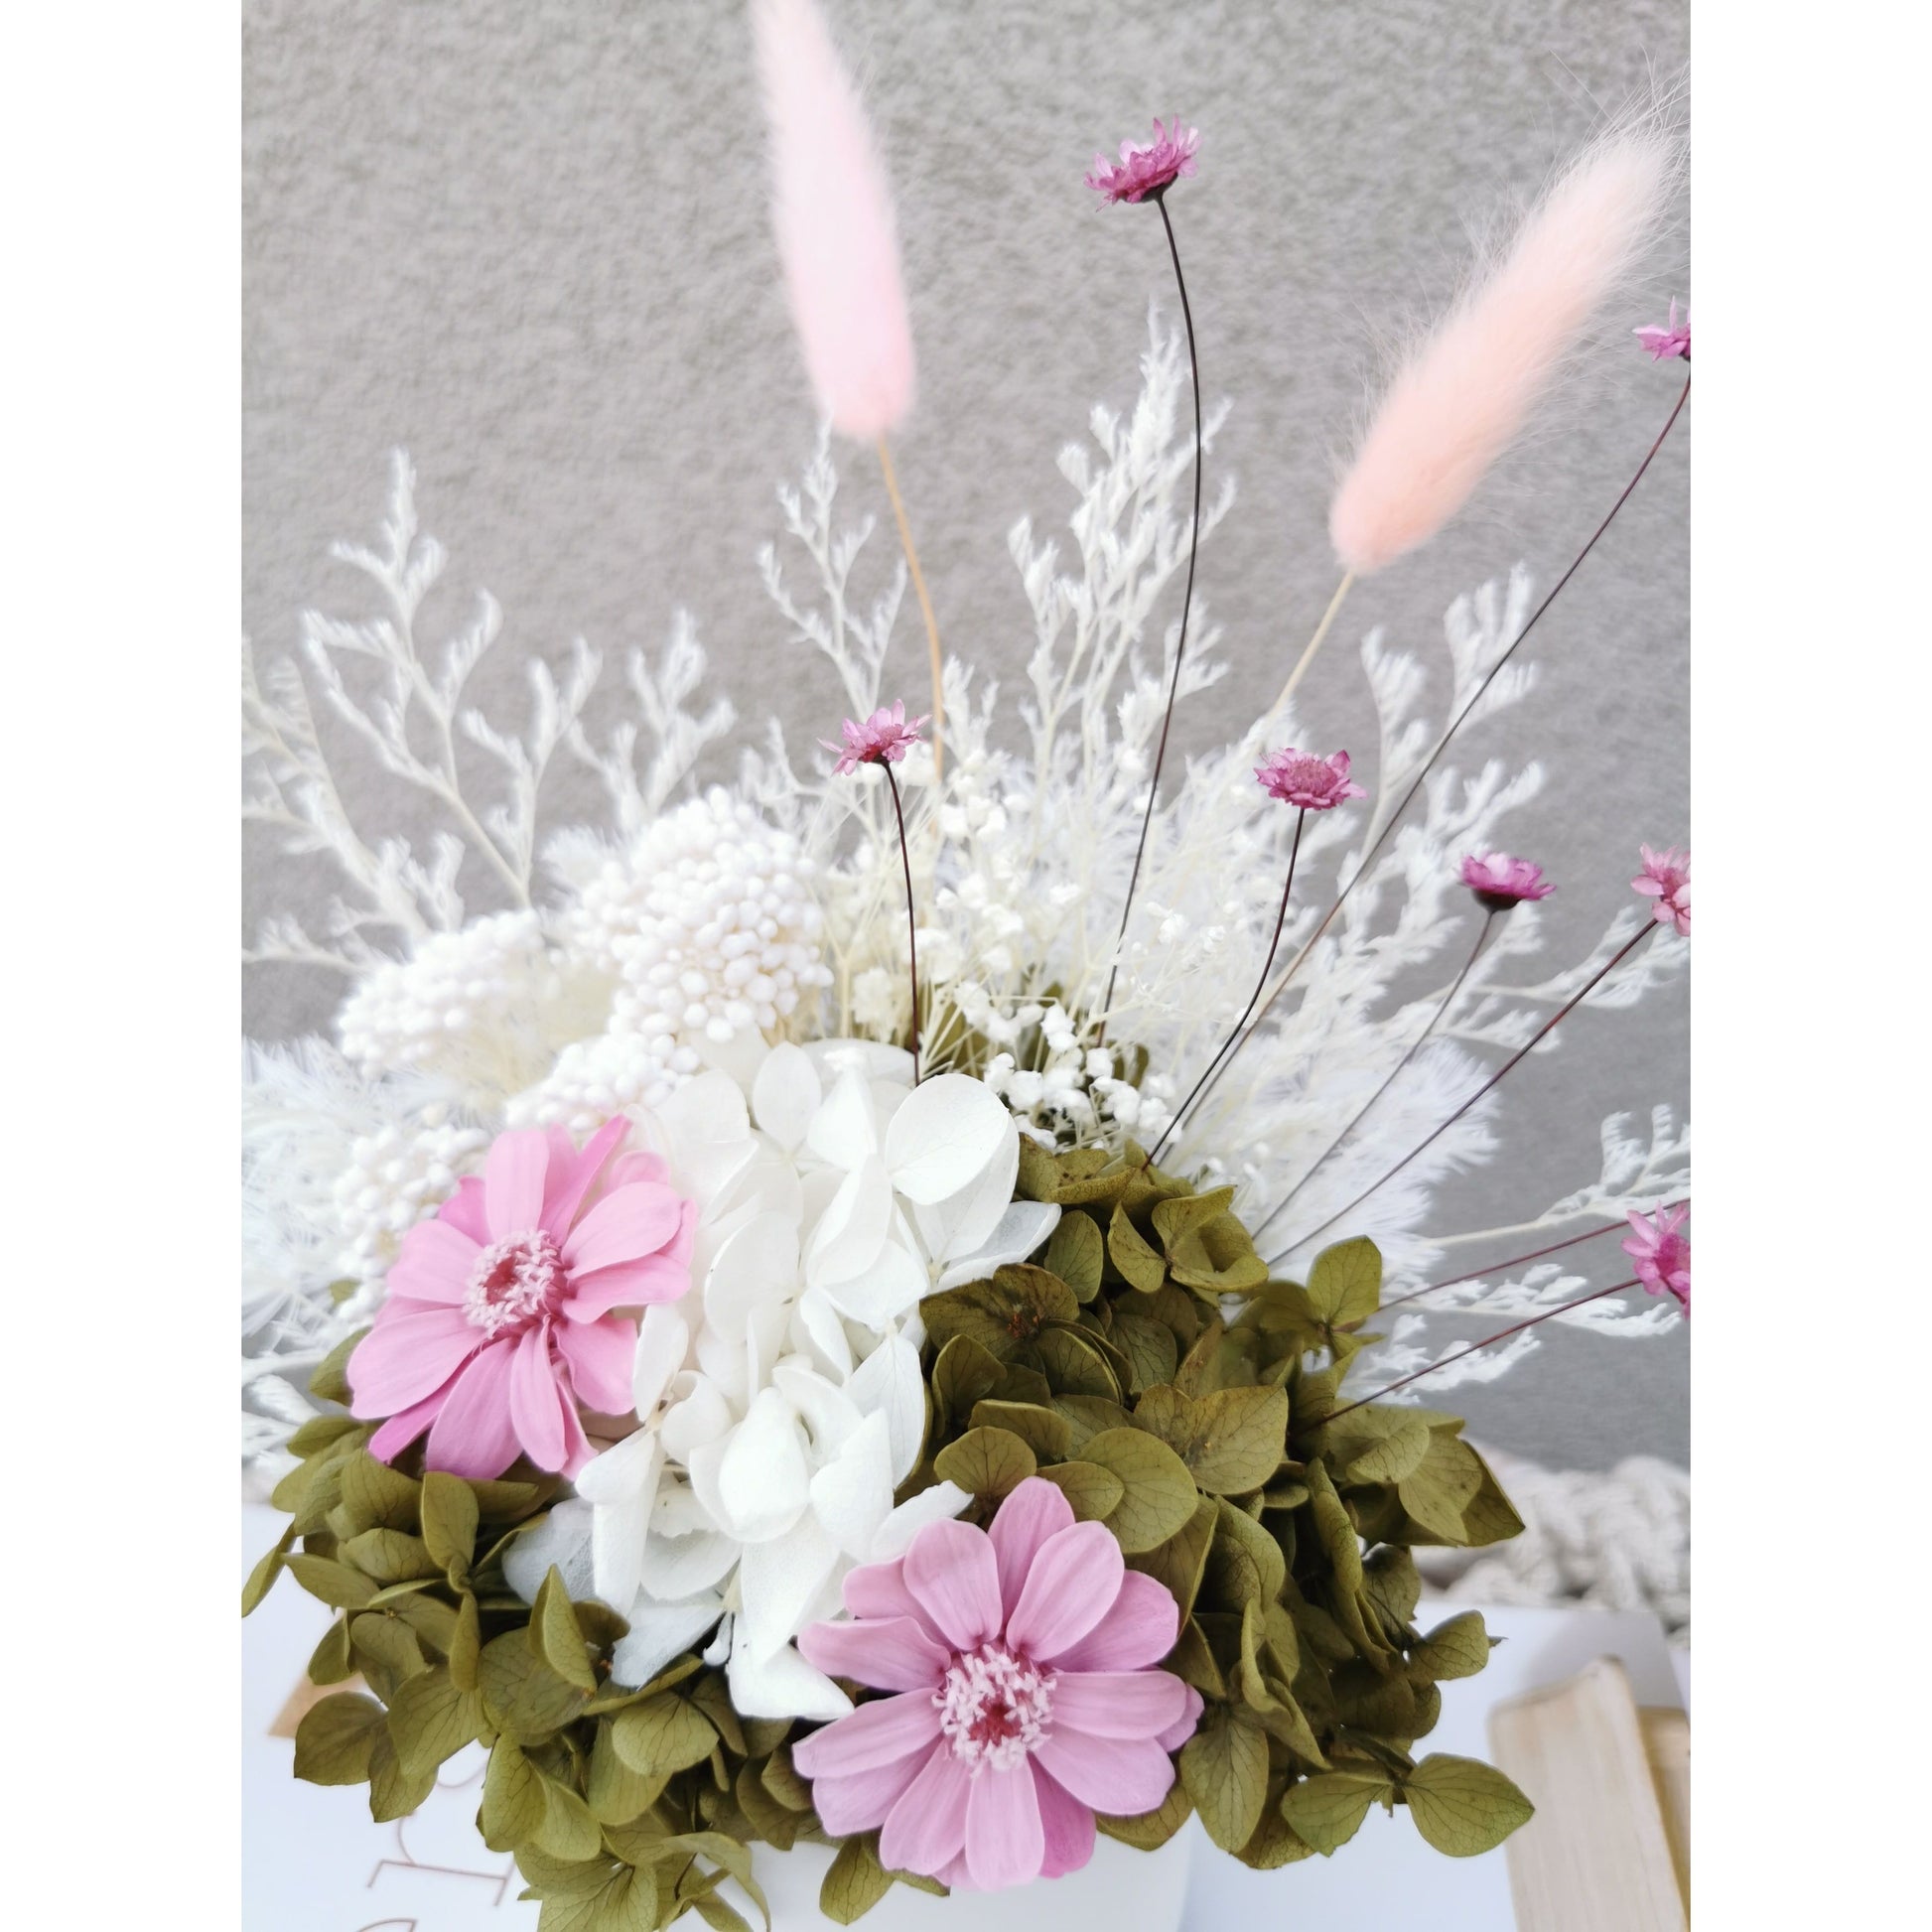 Dried & Preserved flower arrangement in pink, green & white featuring pink zinnia flowers. Photo shows a close up of the flowers